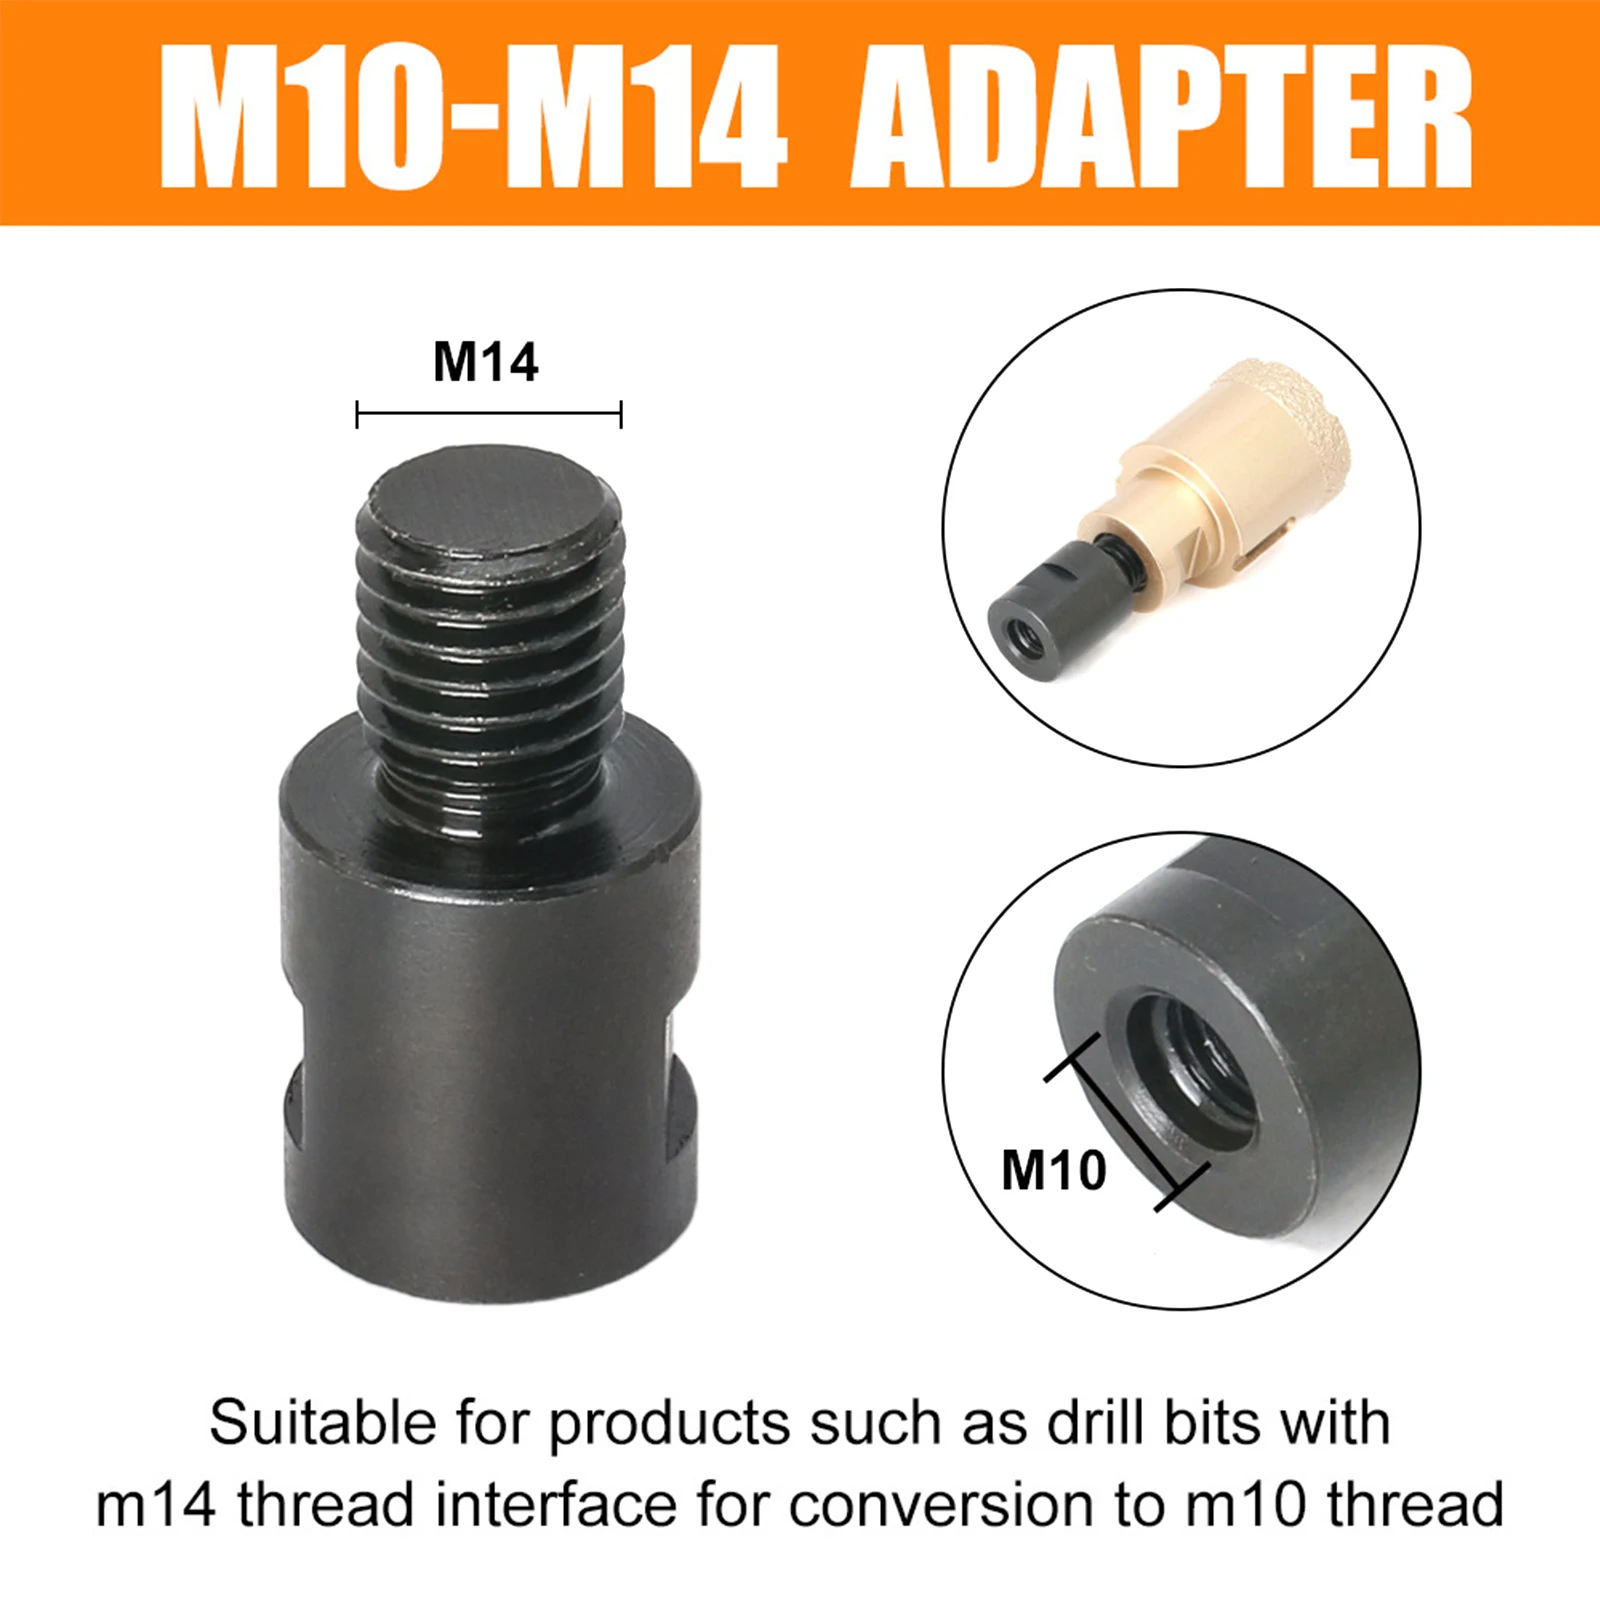 

Angle Grinder M10 M14 5/8-11 Adapter Thread Converter Adapte Interface Connector Screw Connecting Rod Nuts Slotting 100 125 Type